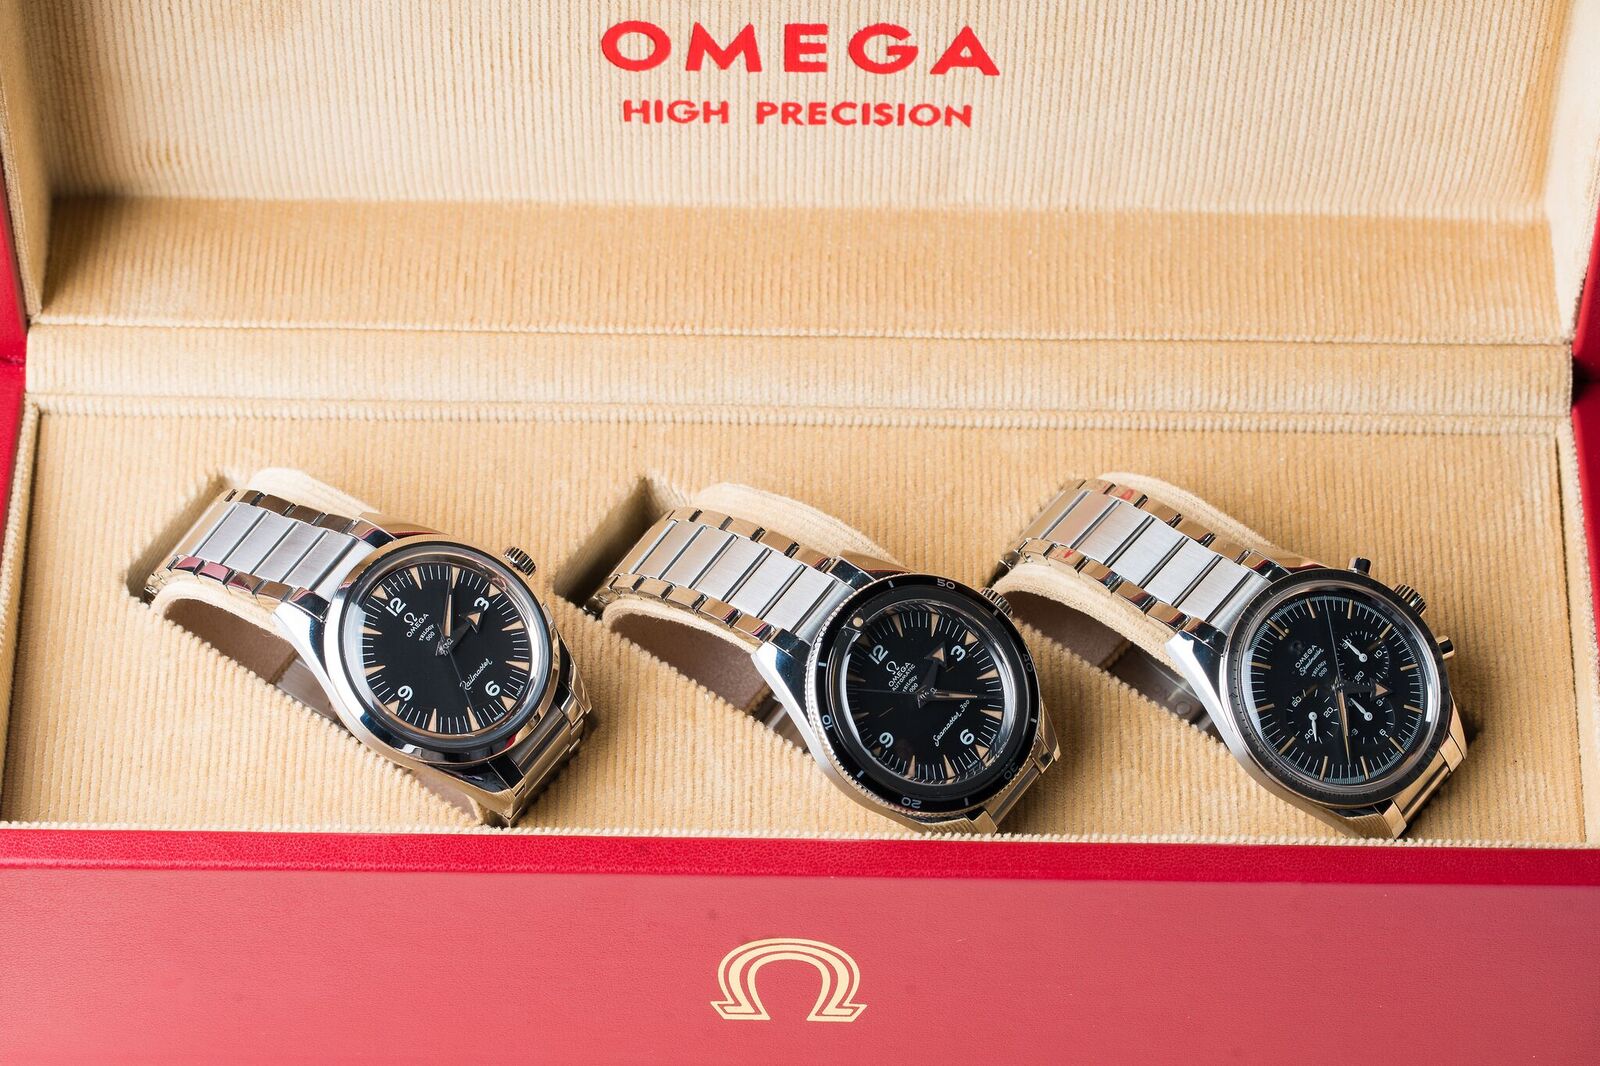 Omega's Trilogy Sets also brings back the smaller sizes of yesteryear